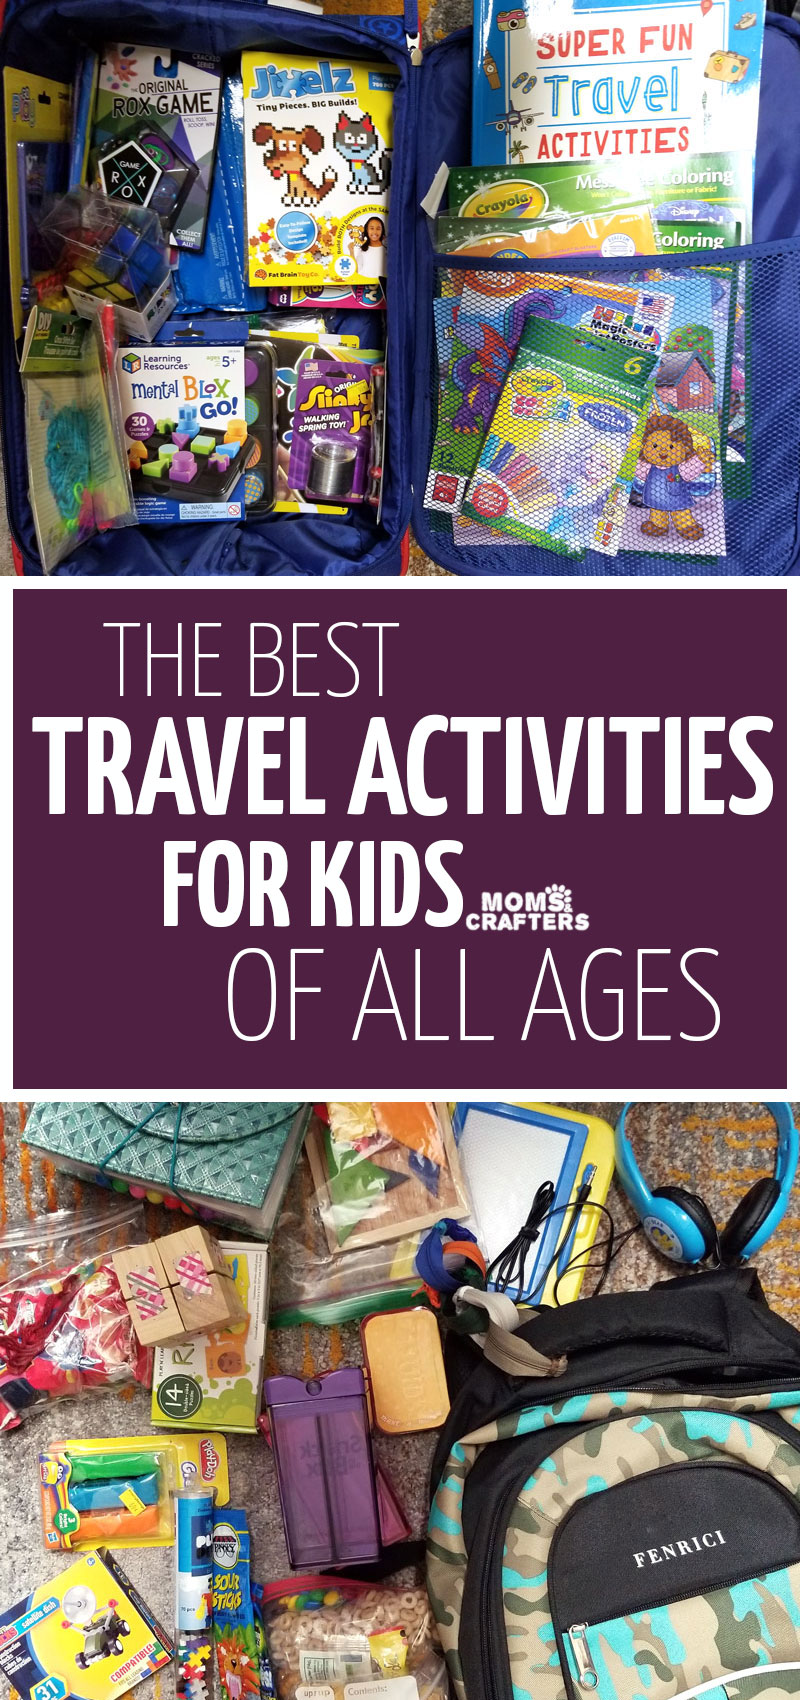 Airplane Activities for Kids for Travel and Long Haul Flights